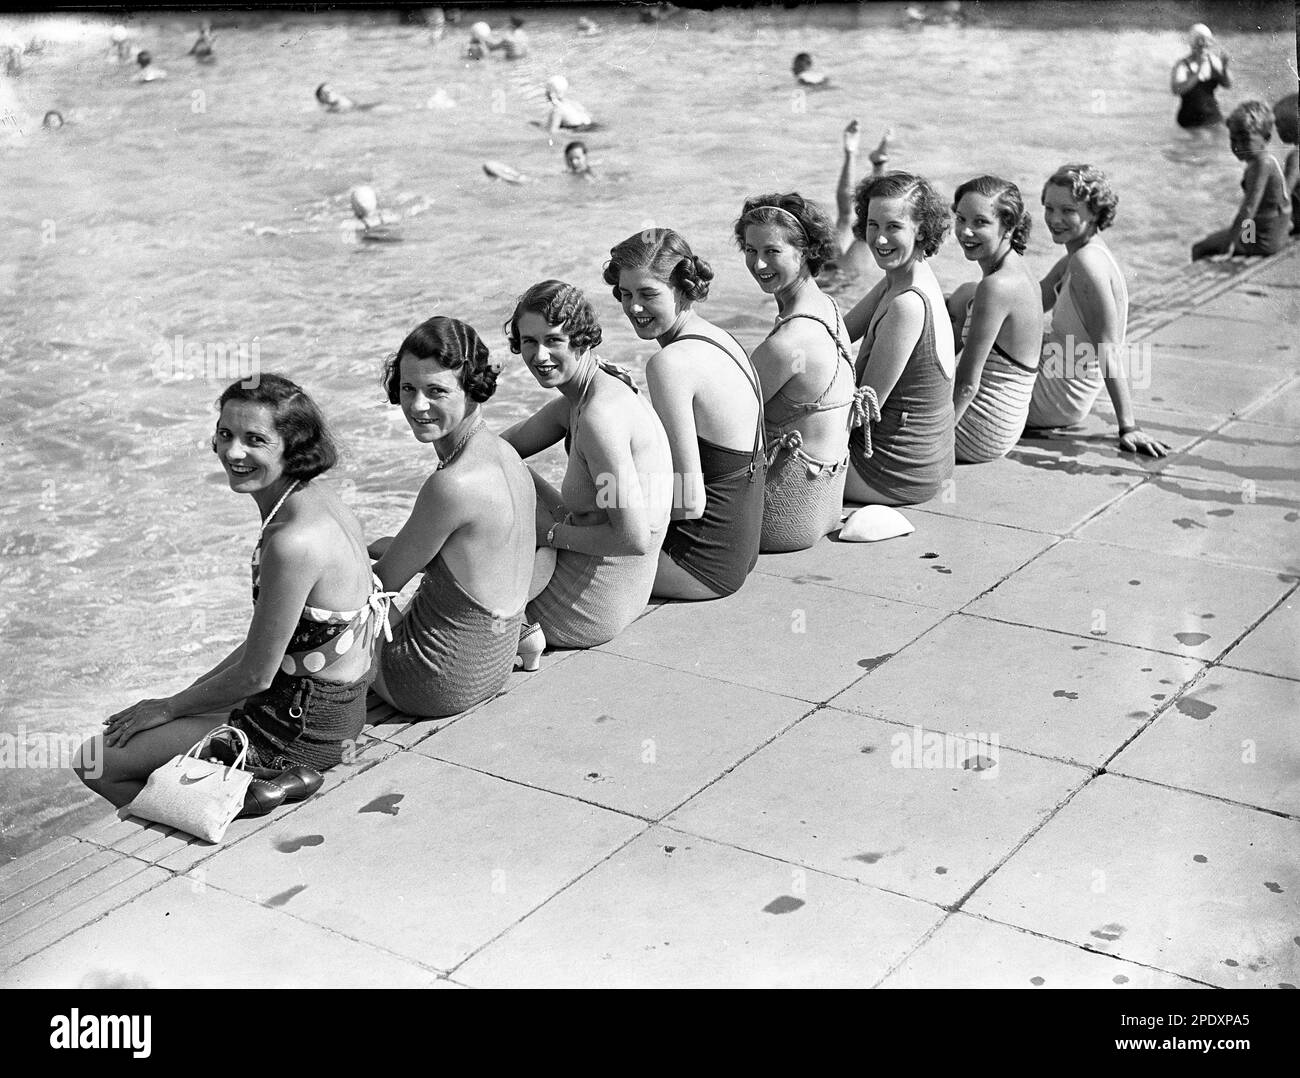 Bathing beauties ladies in swimsuits at the open-air swimming pool in ...